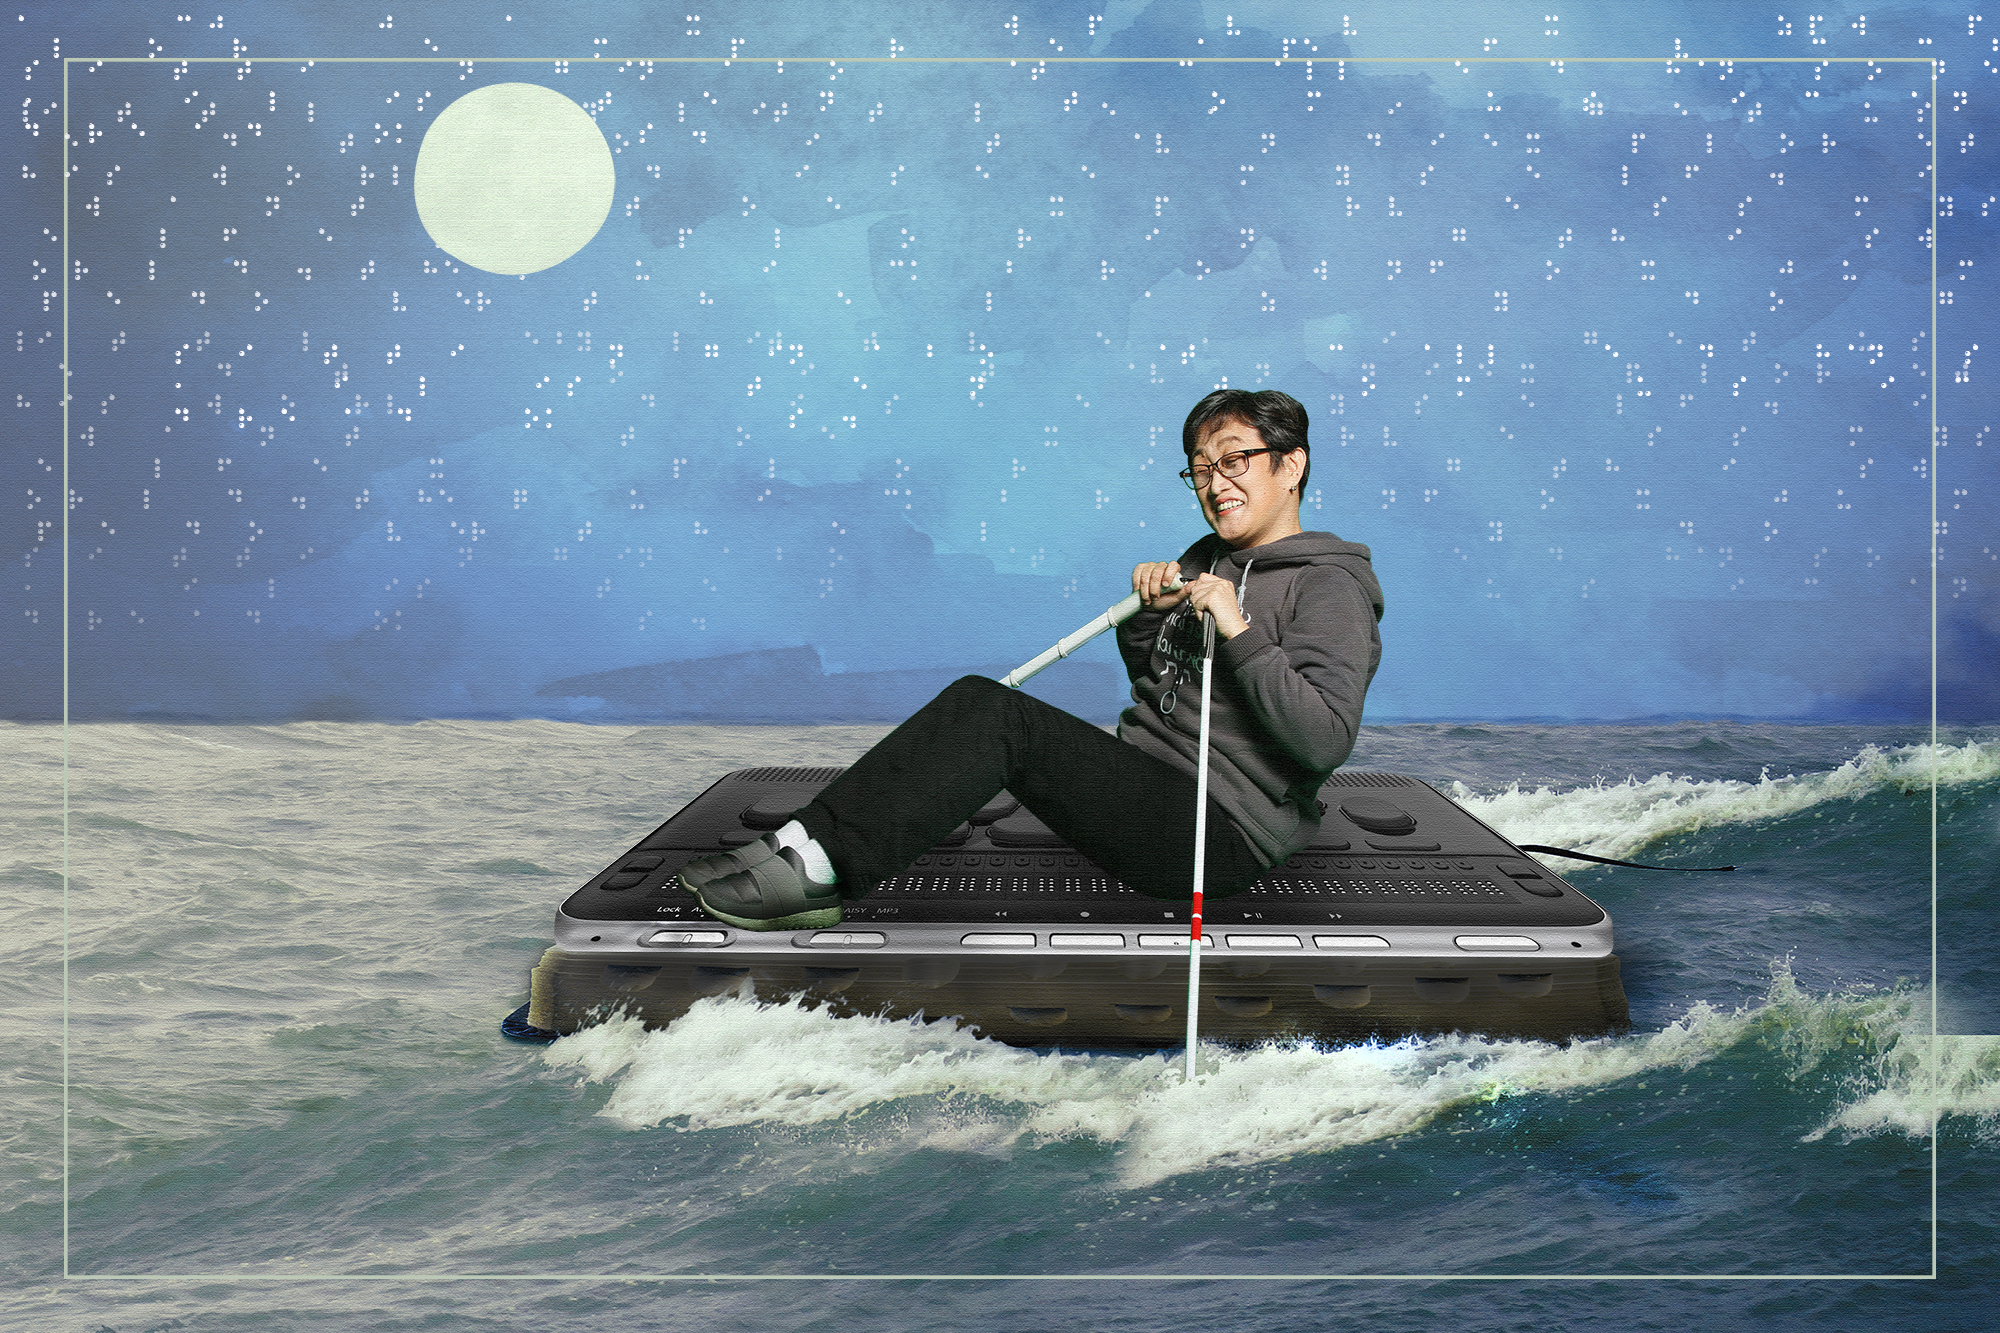 Collage of Miae on a braille device, floating on the ocean, using walking sticks as oars. A moon and braille symbols in the background.